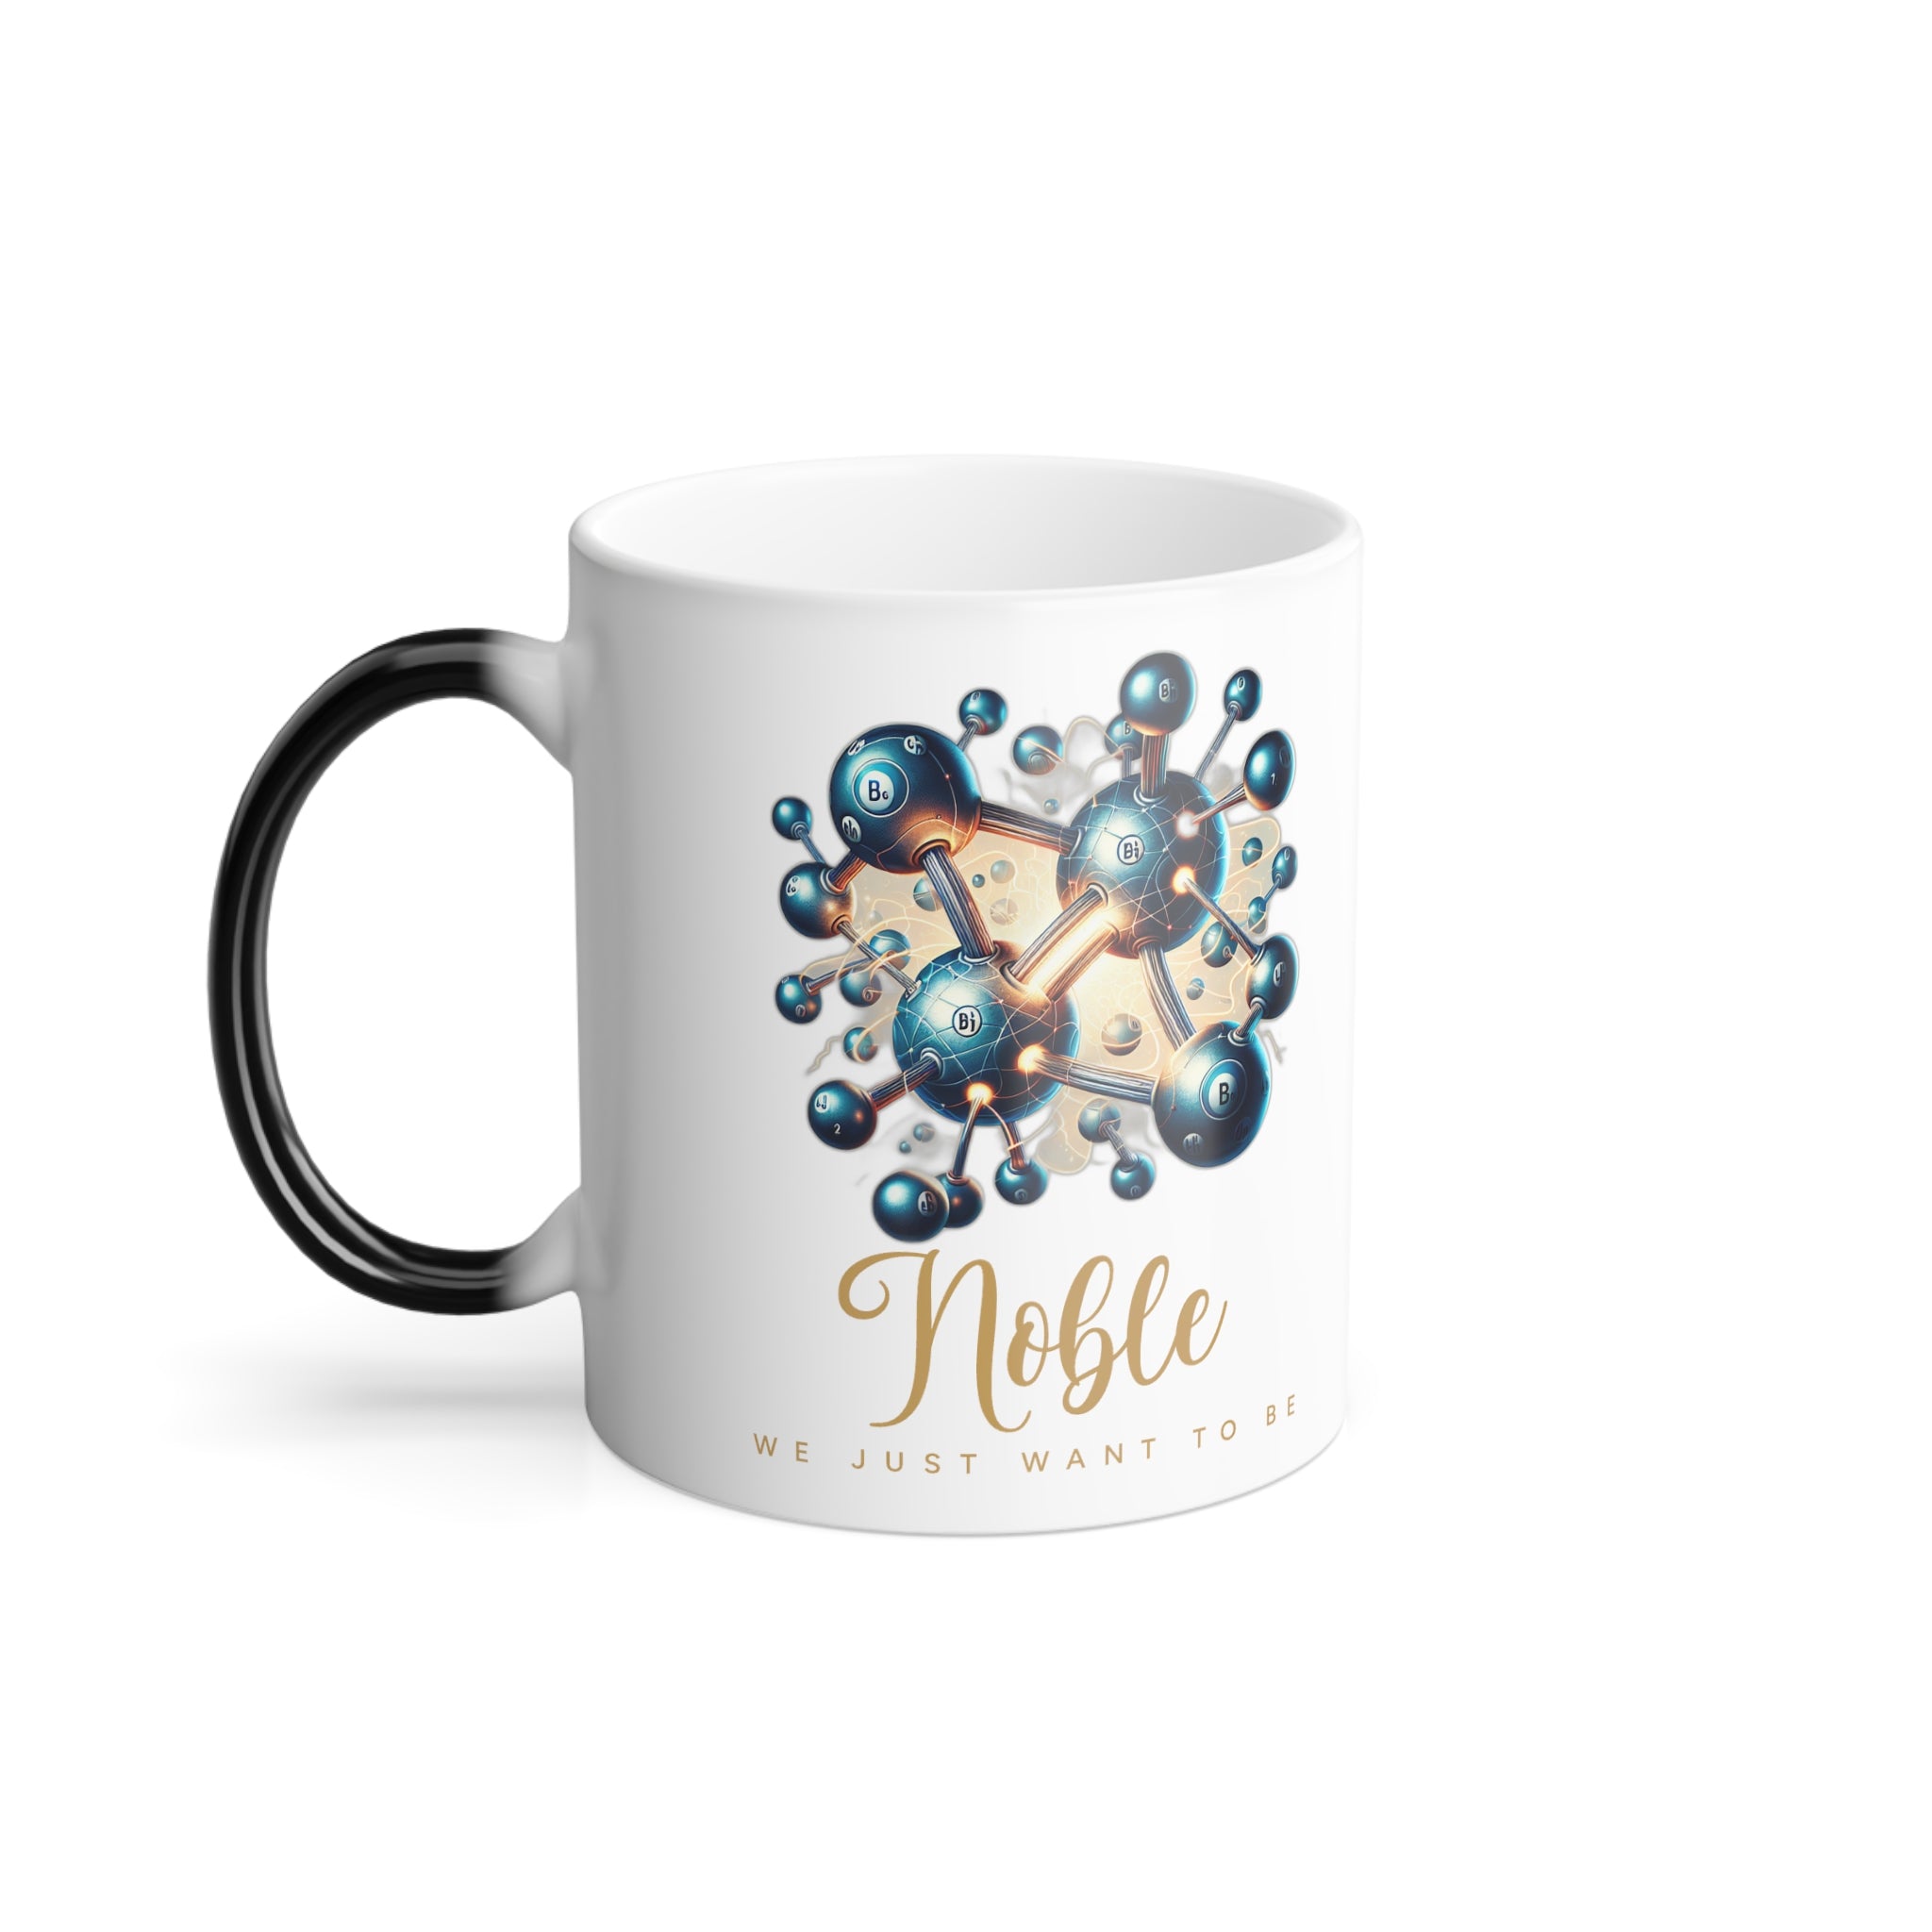 Color Morphing Mug, 11oz (We Just Want to be Noble